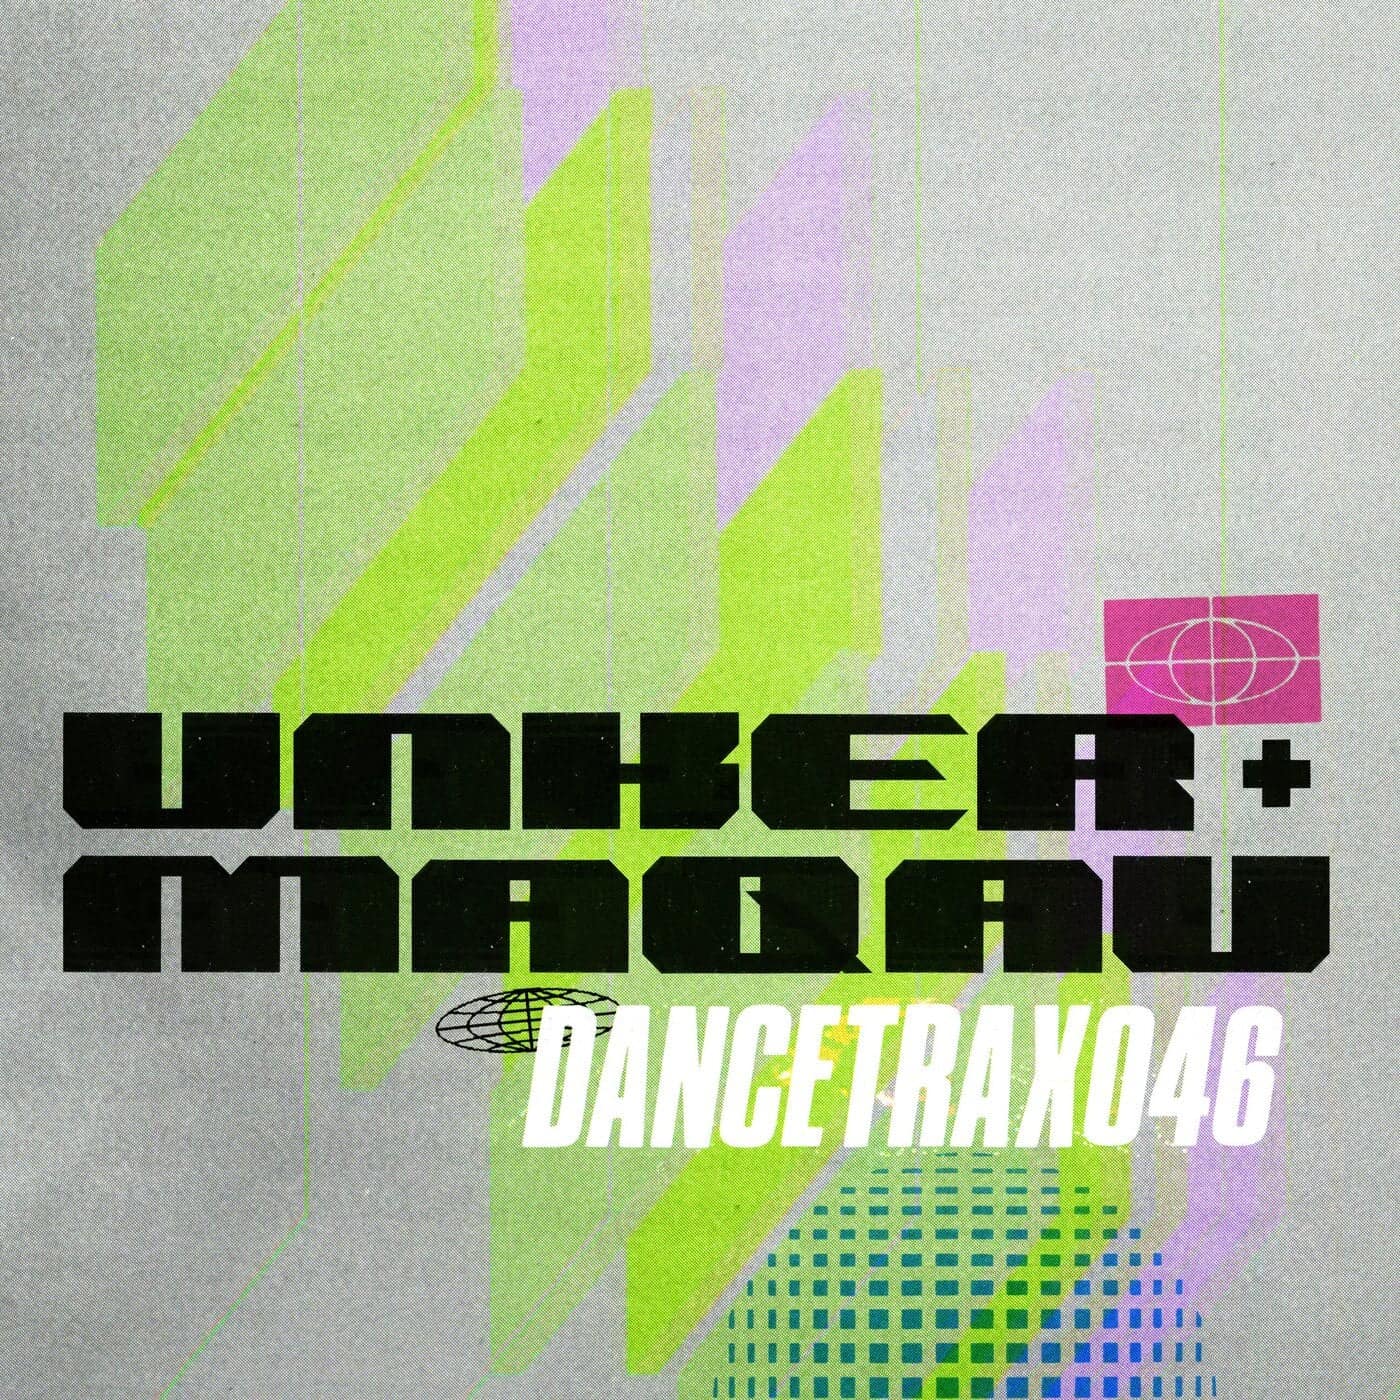 Download Unker, MAQAU - Dance Trax, Vol. 46 on Electrobuzz